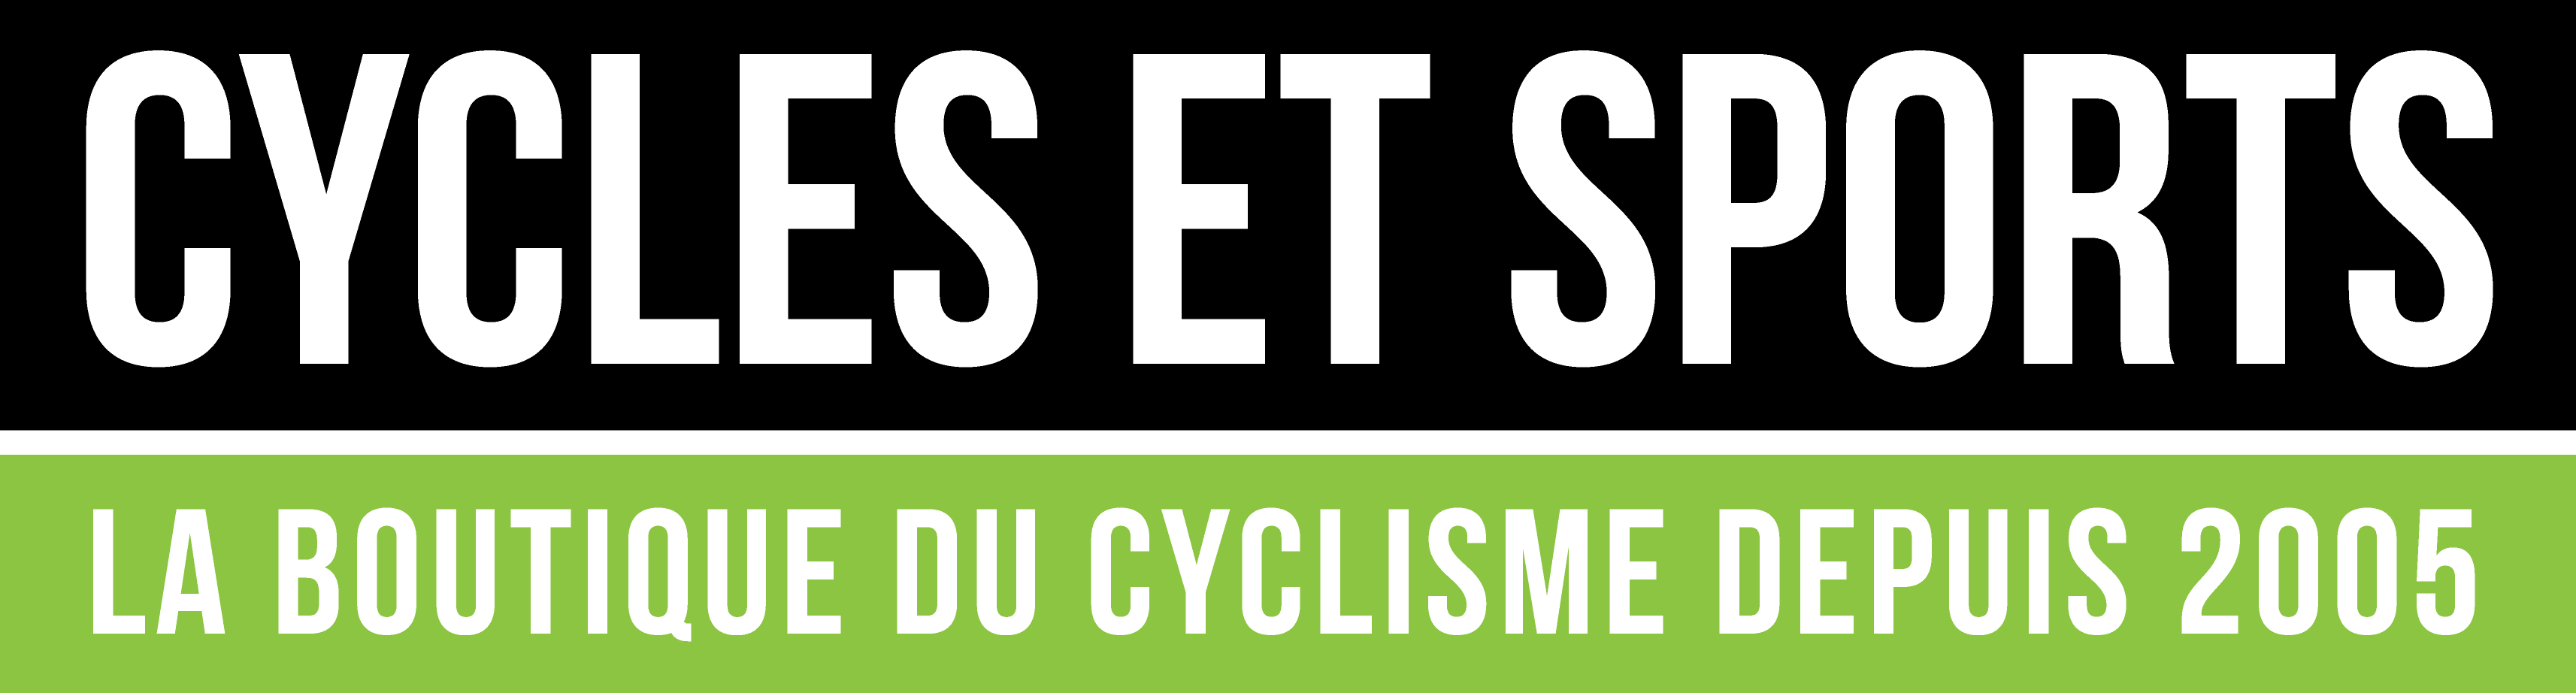 CYCLES ET SPORTS